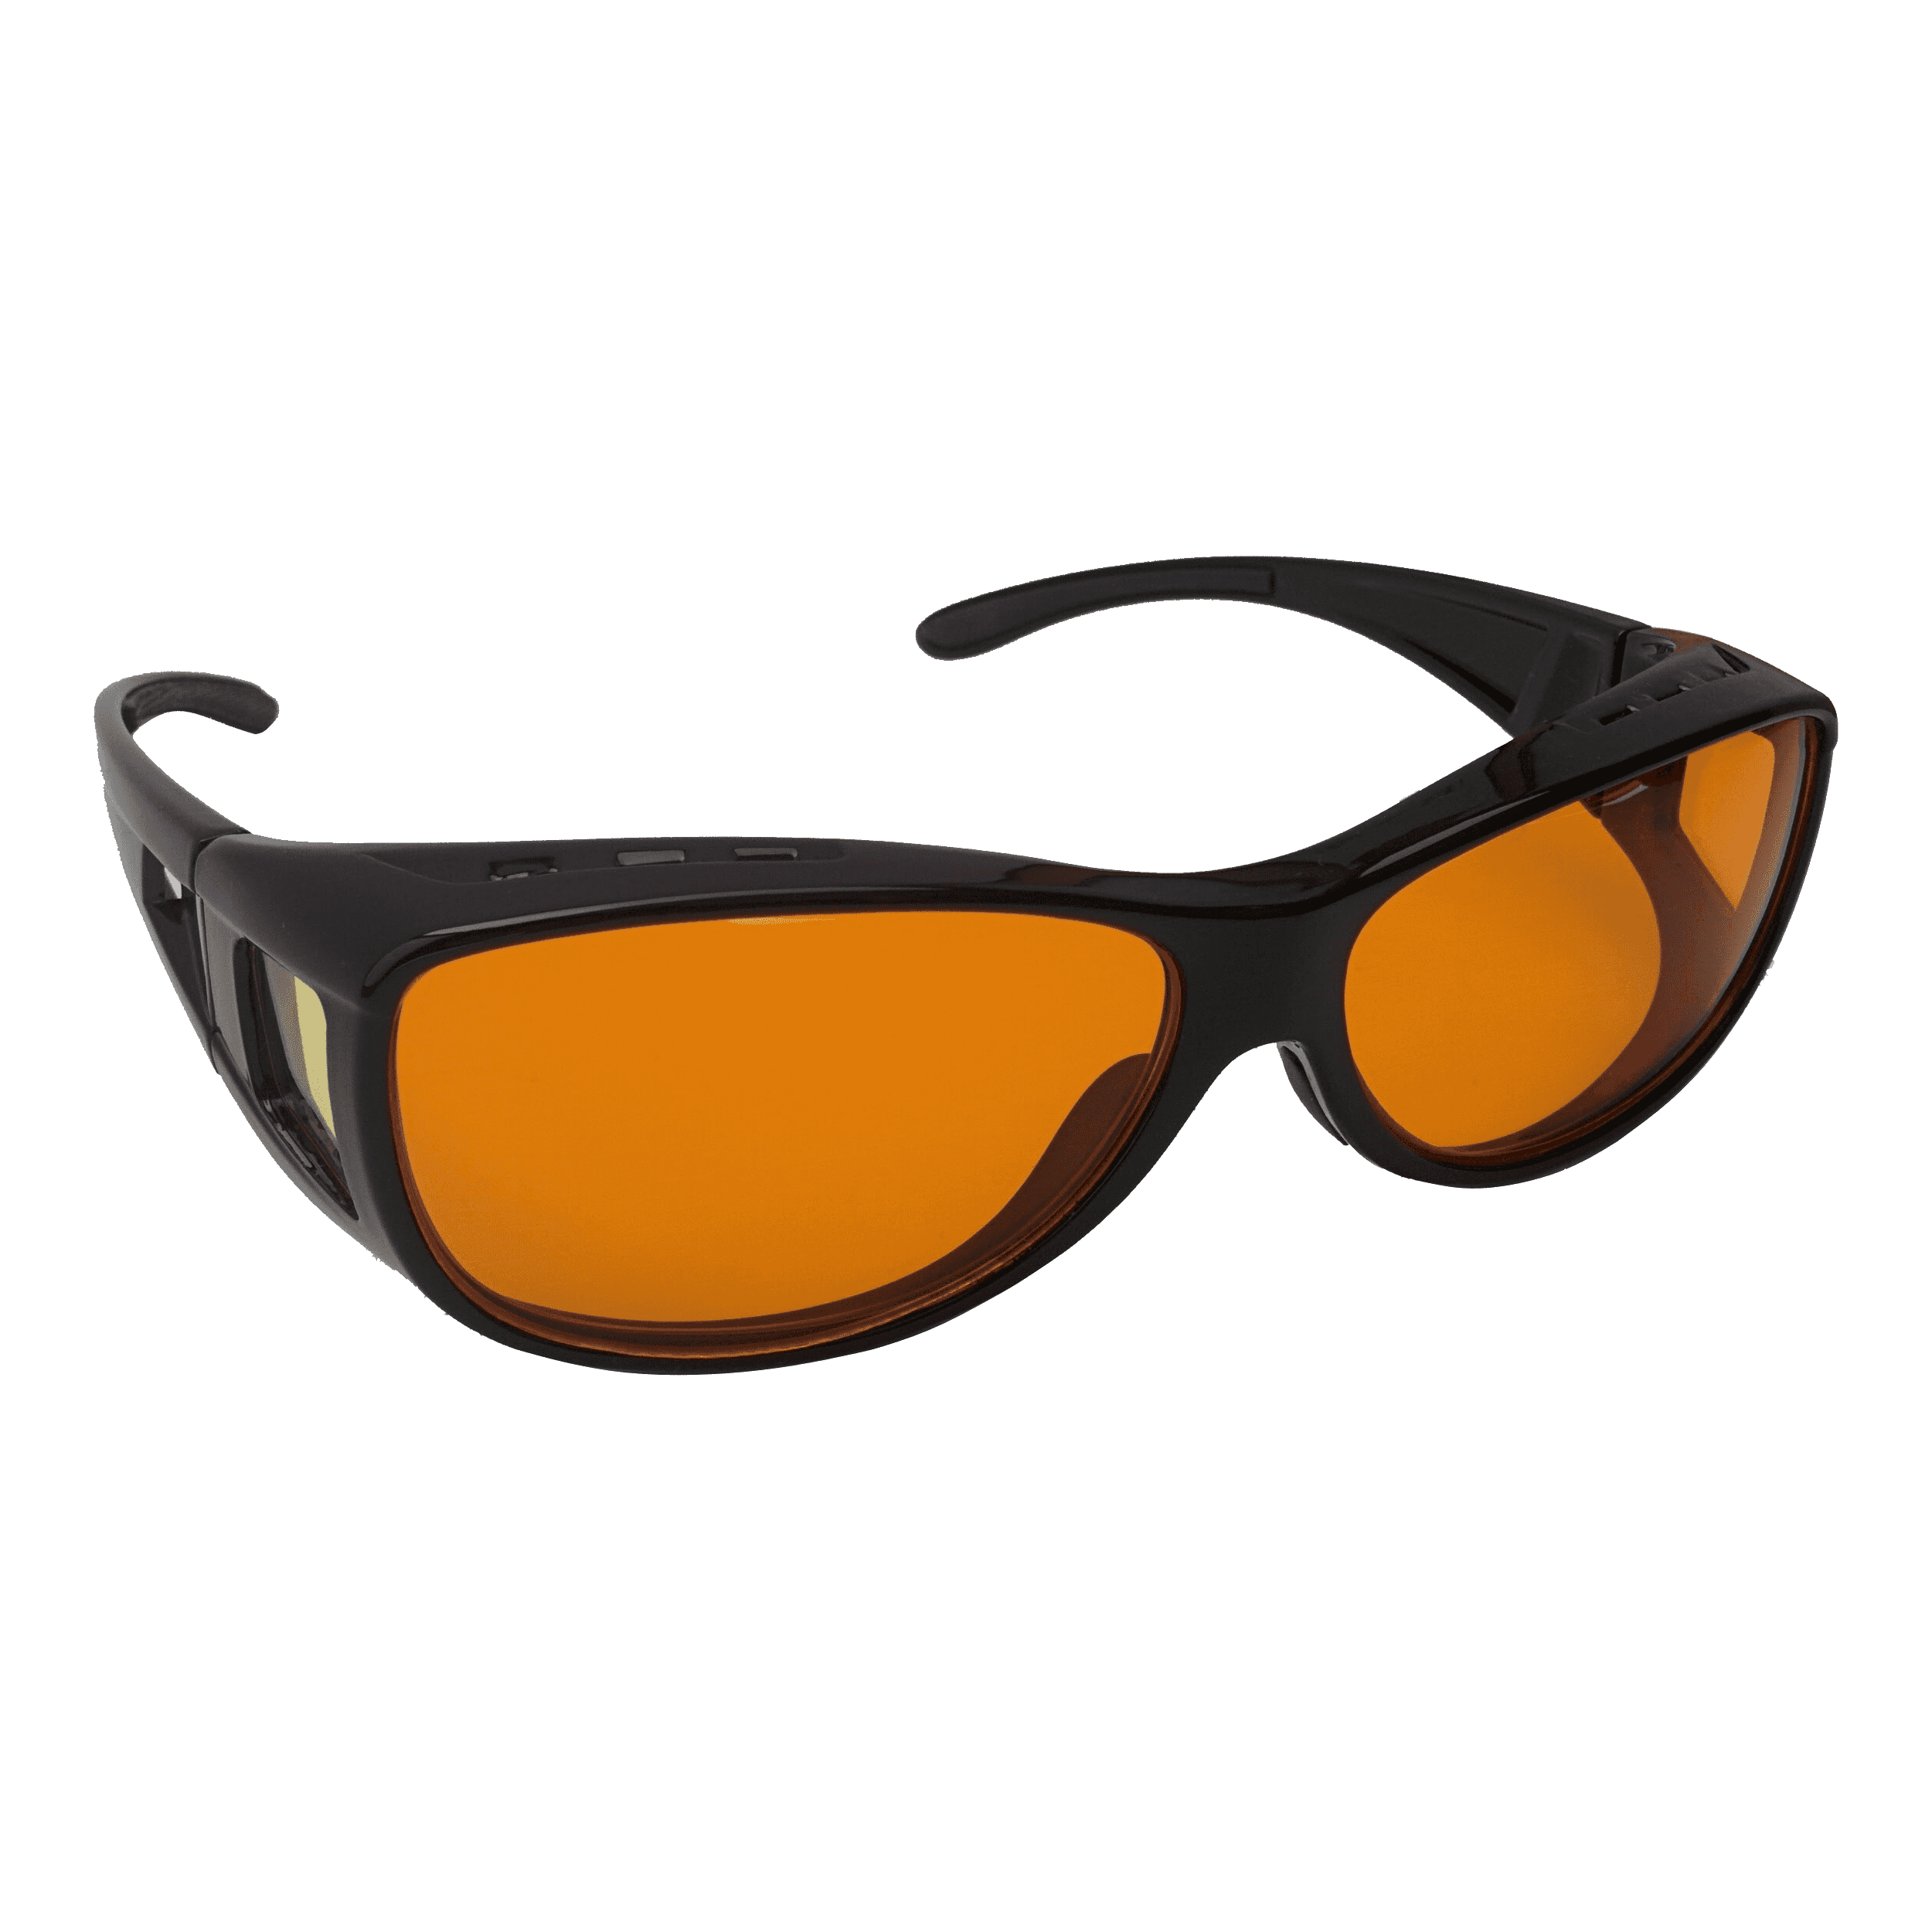 Amber Sleep Glasses Rx Fitover